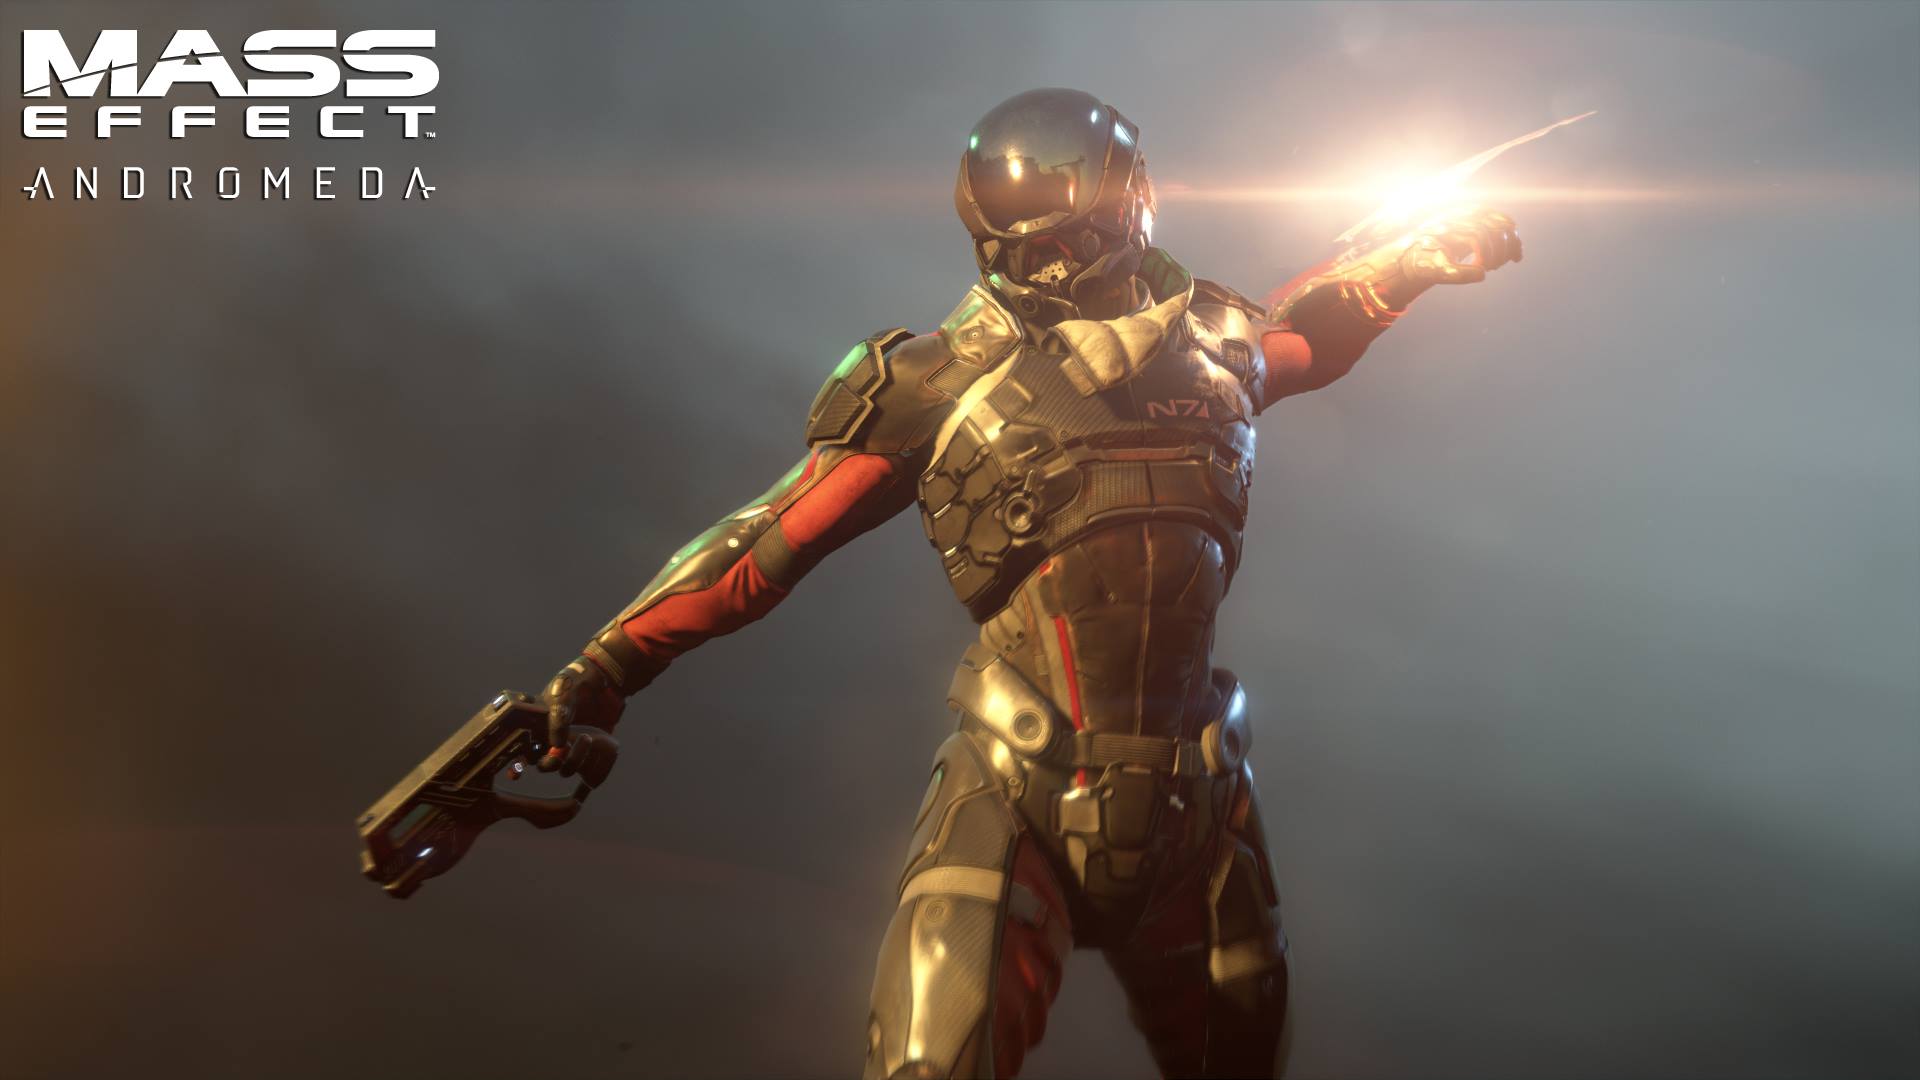 “Mass Effect Andromeda” Delayed into 2017 - Still Little Information Revealed About the Game 